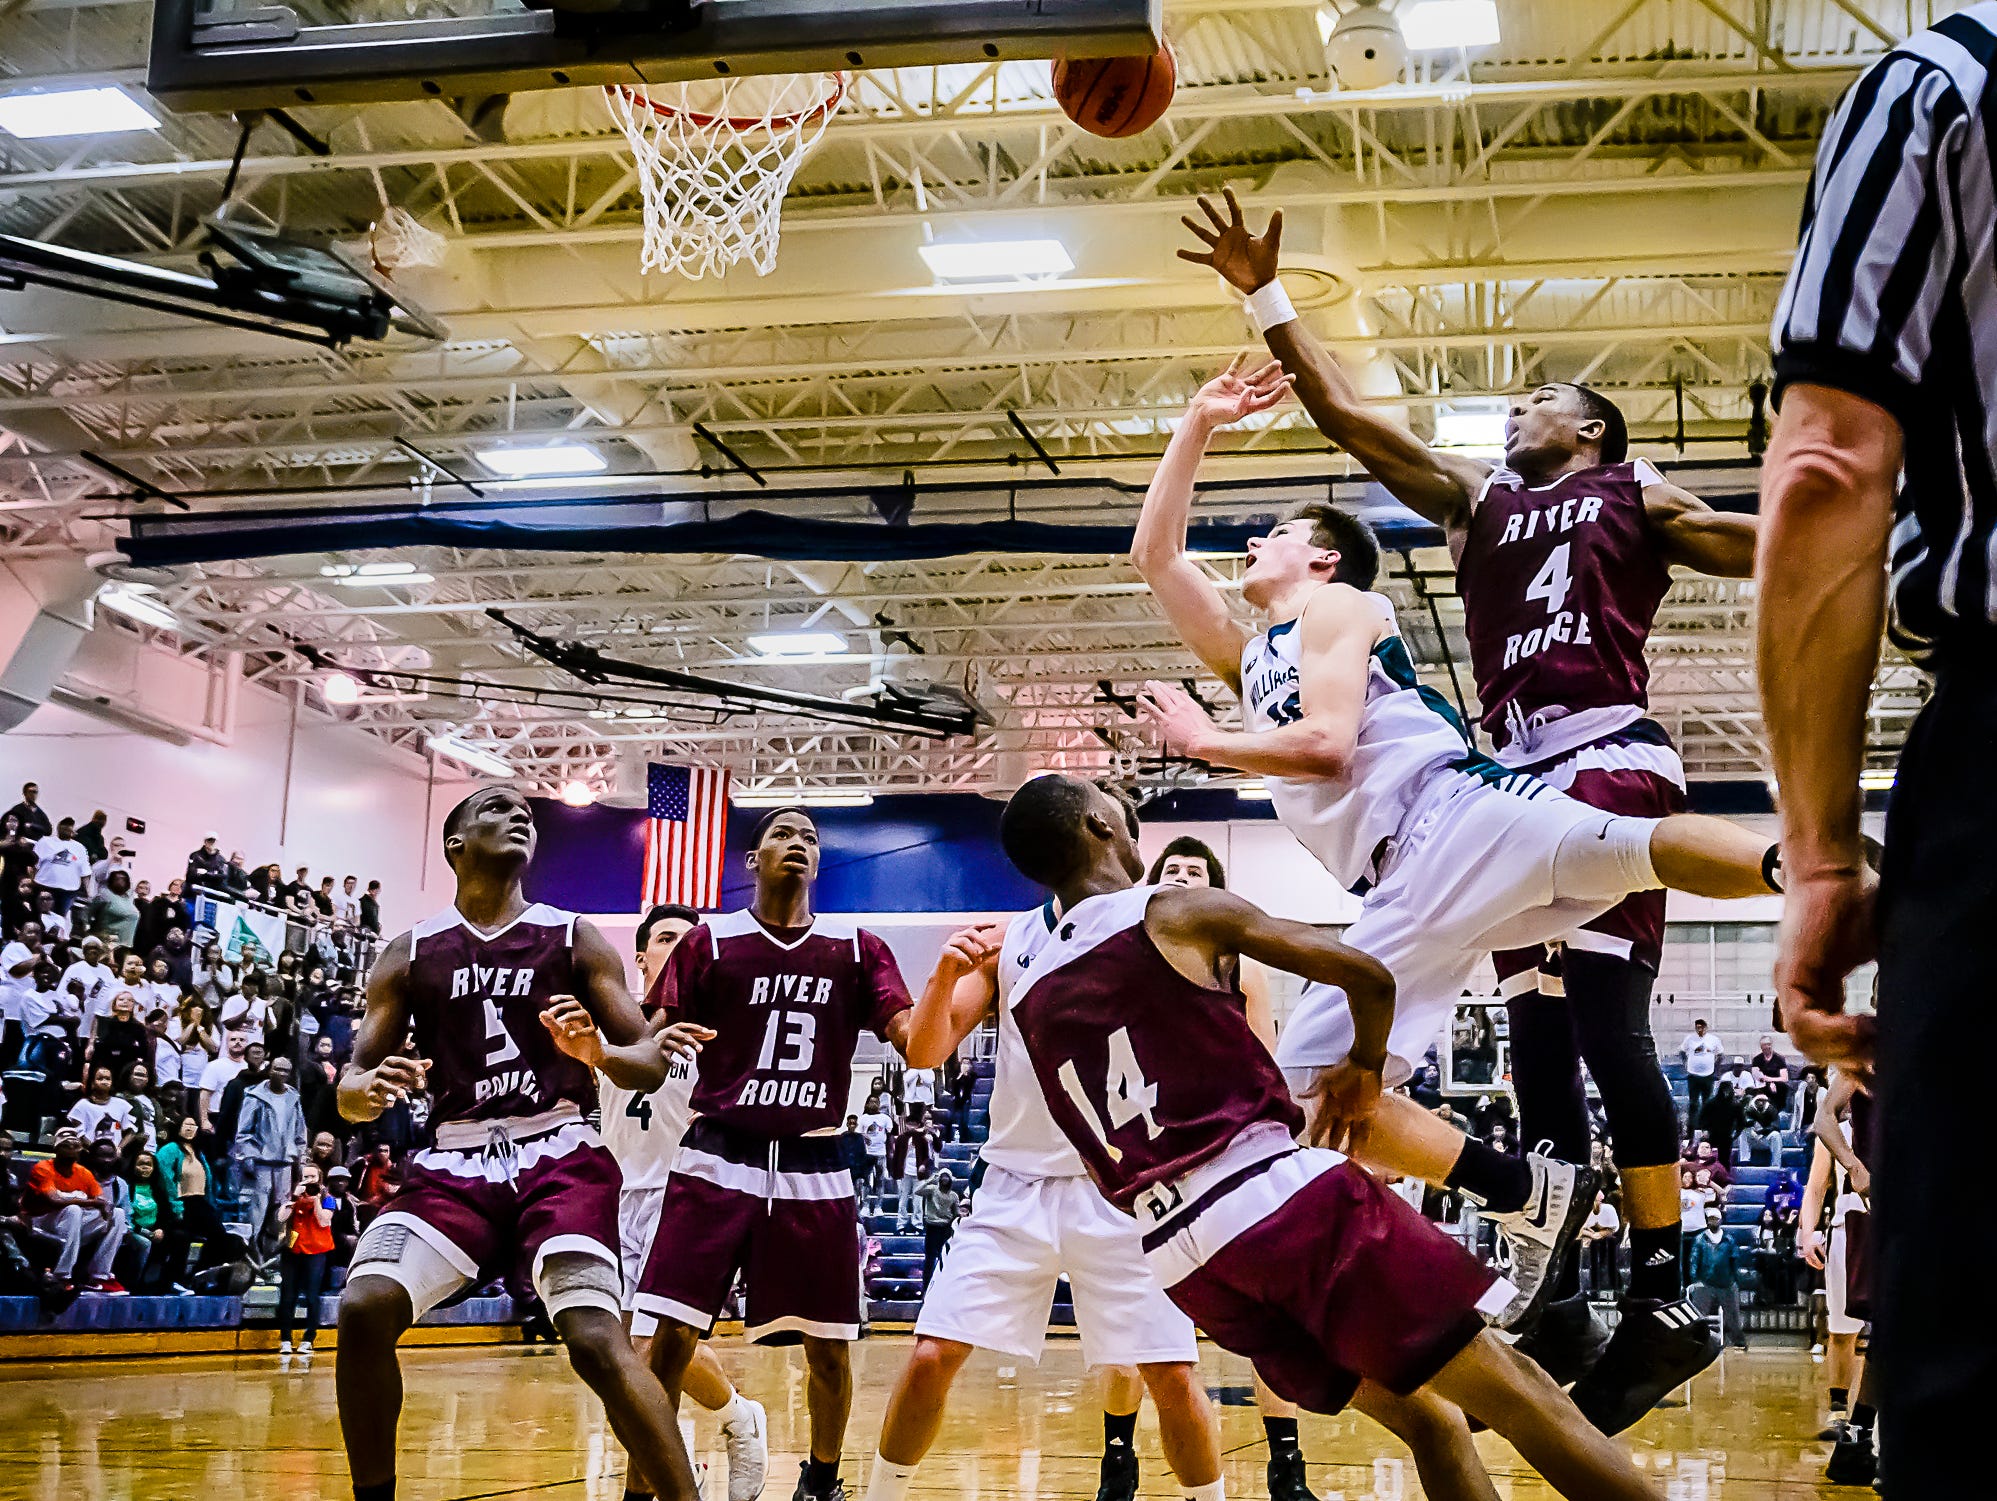 Mitchell Cook ,second from right, of Williamston lays the ball up and in as he collides with Jayvien Torrence ,14, of River Rouge with 18 seconds remaining in their Class B state quarterfinal game and the score tied at 51 Tuesday March 21, 2017 at Chelsea High School in Chelsea. The basket was waived off as Cook was charged with a player control foul.